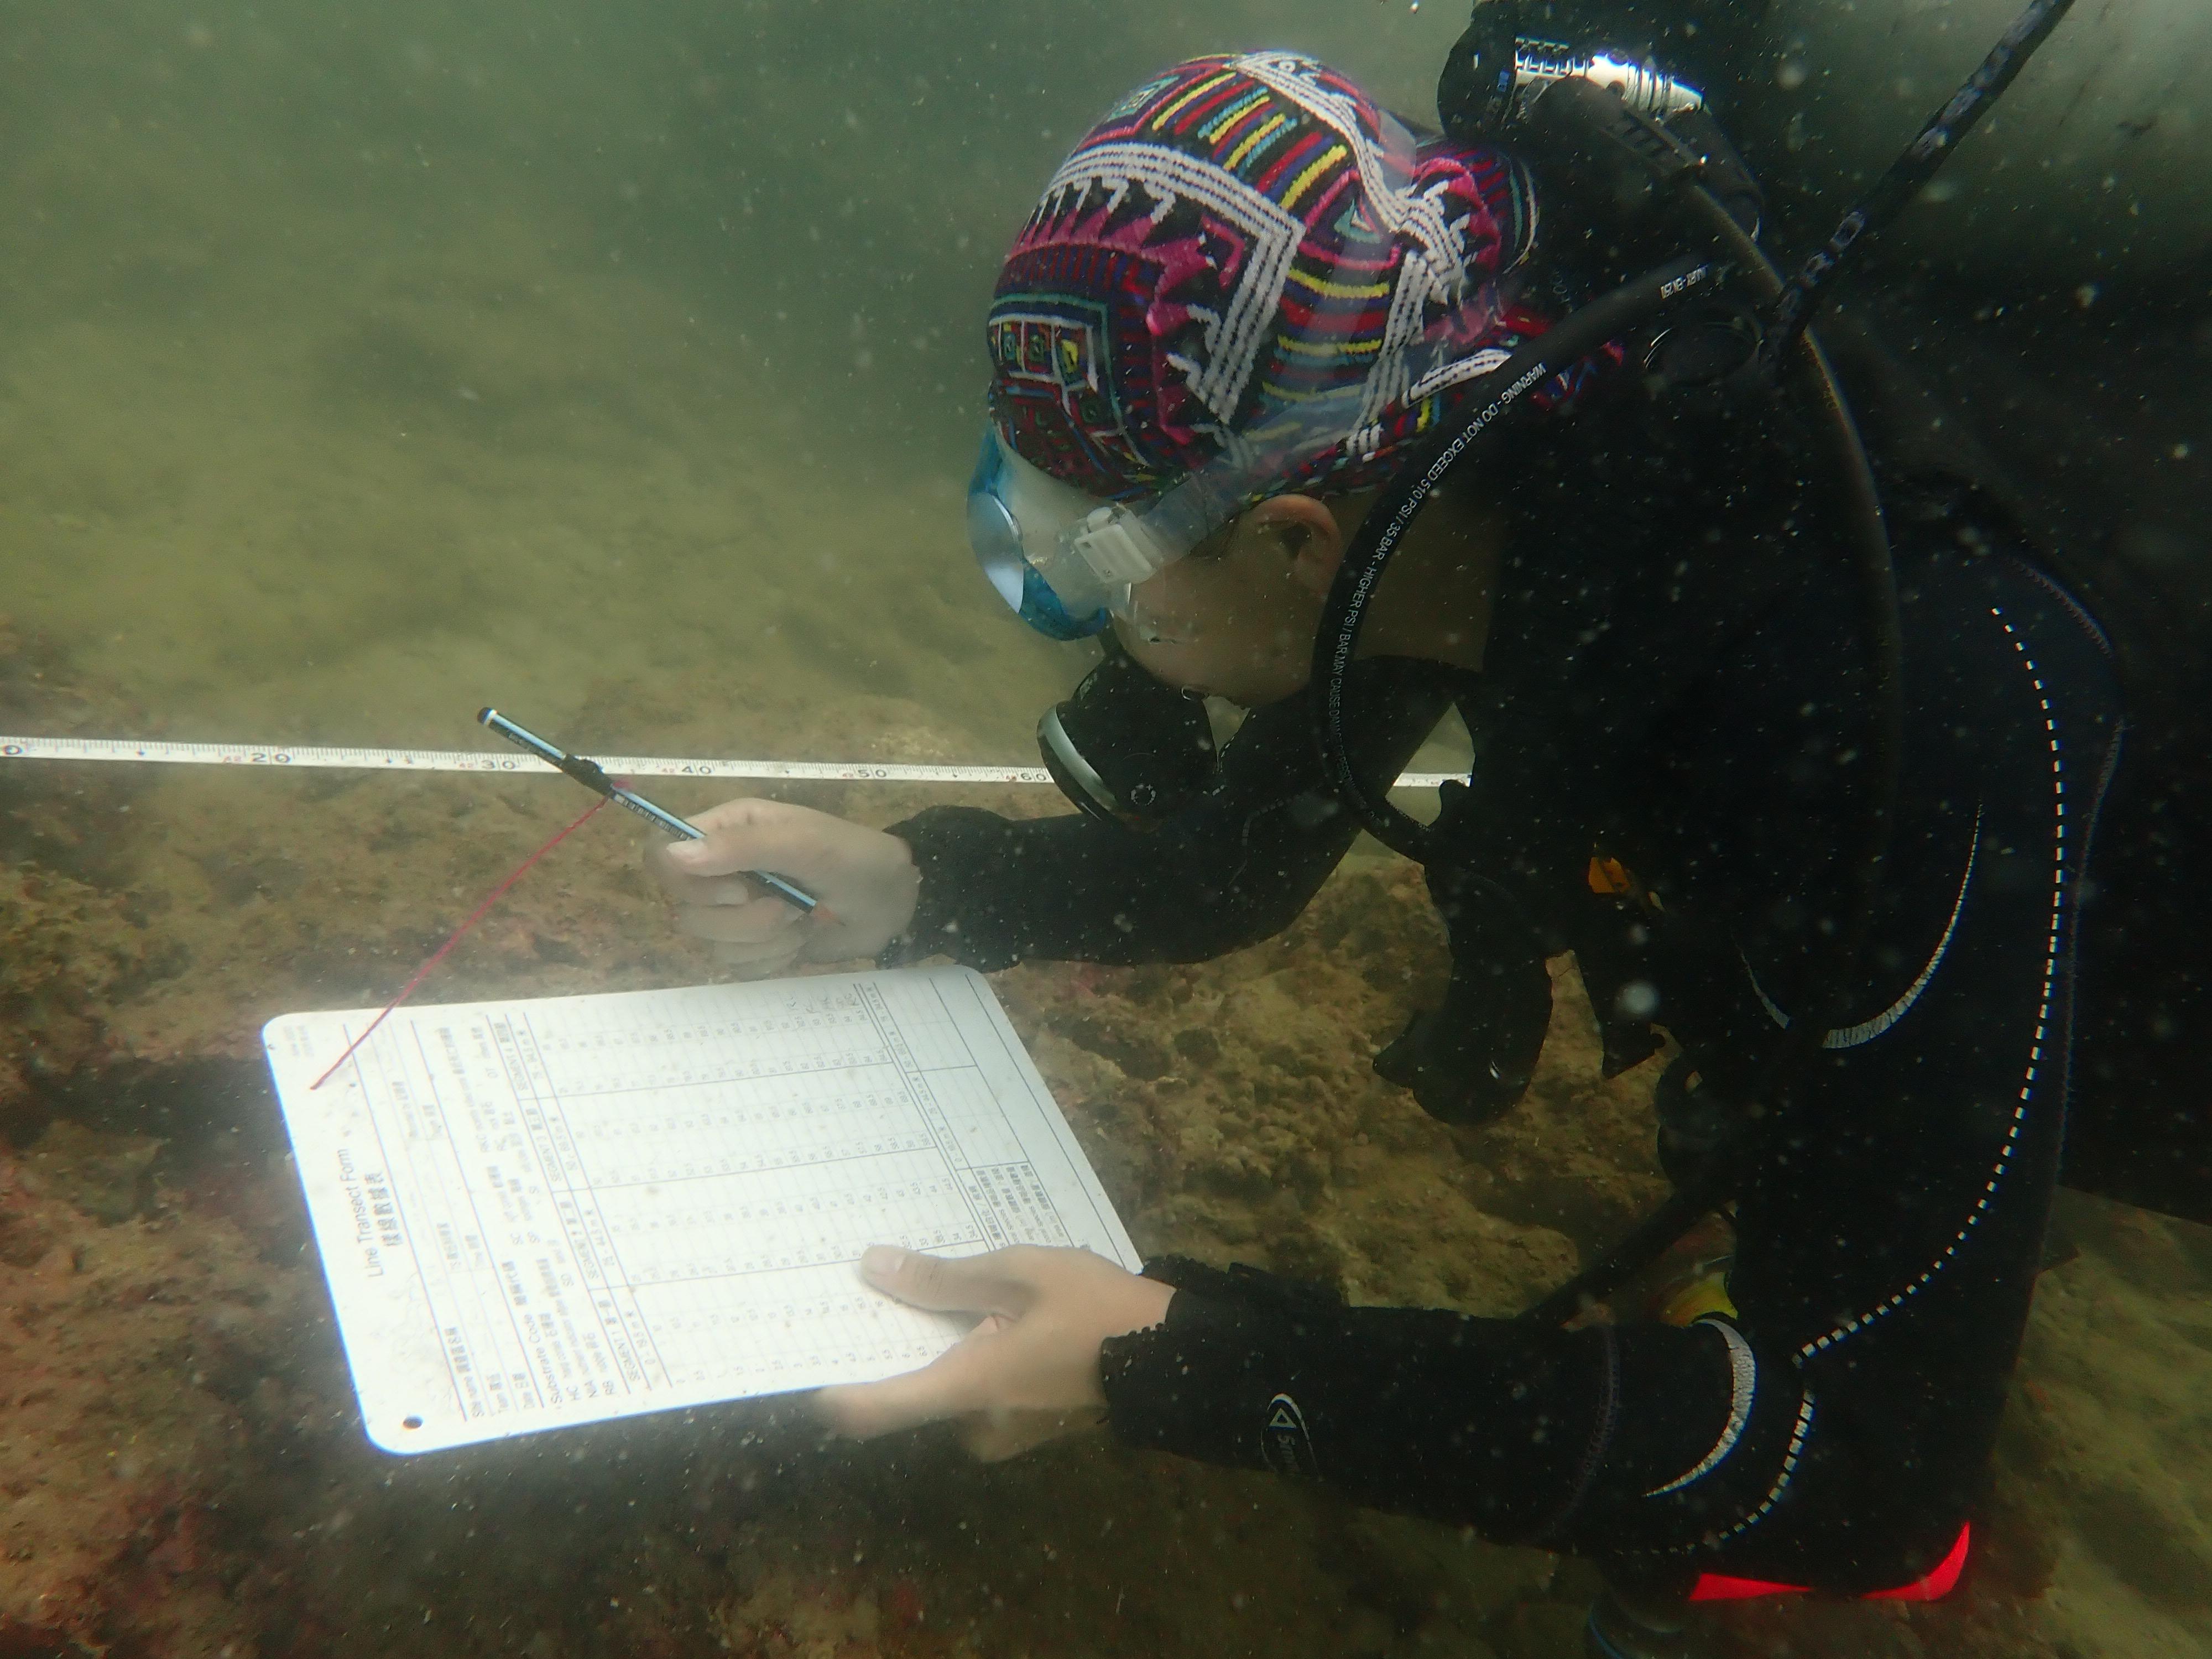 The Agriculture, Fisheries and Conservation Department announced today (December 10) that the results of the Hong Kong Reef Check this year showed that local corals are generally in a healthy condition and that the species diversity remains on the high side. Photo shows a Reef Check diver conducting a coral survey.